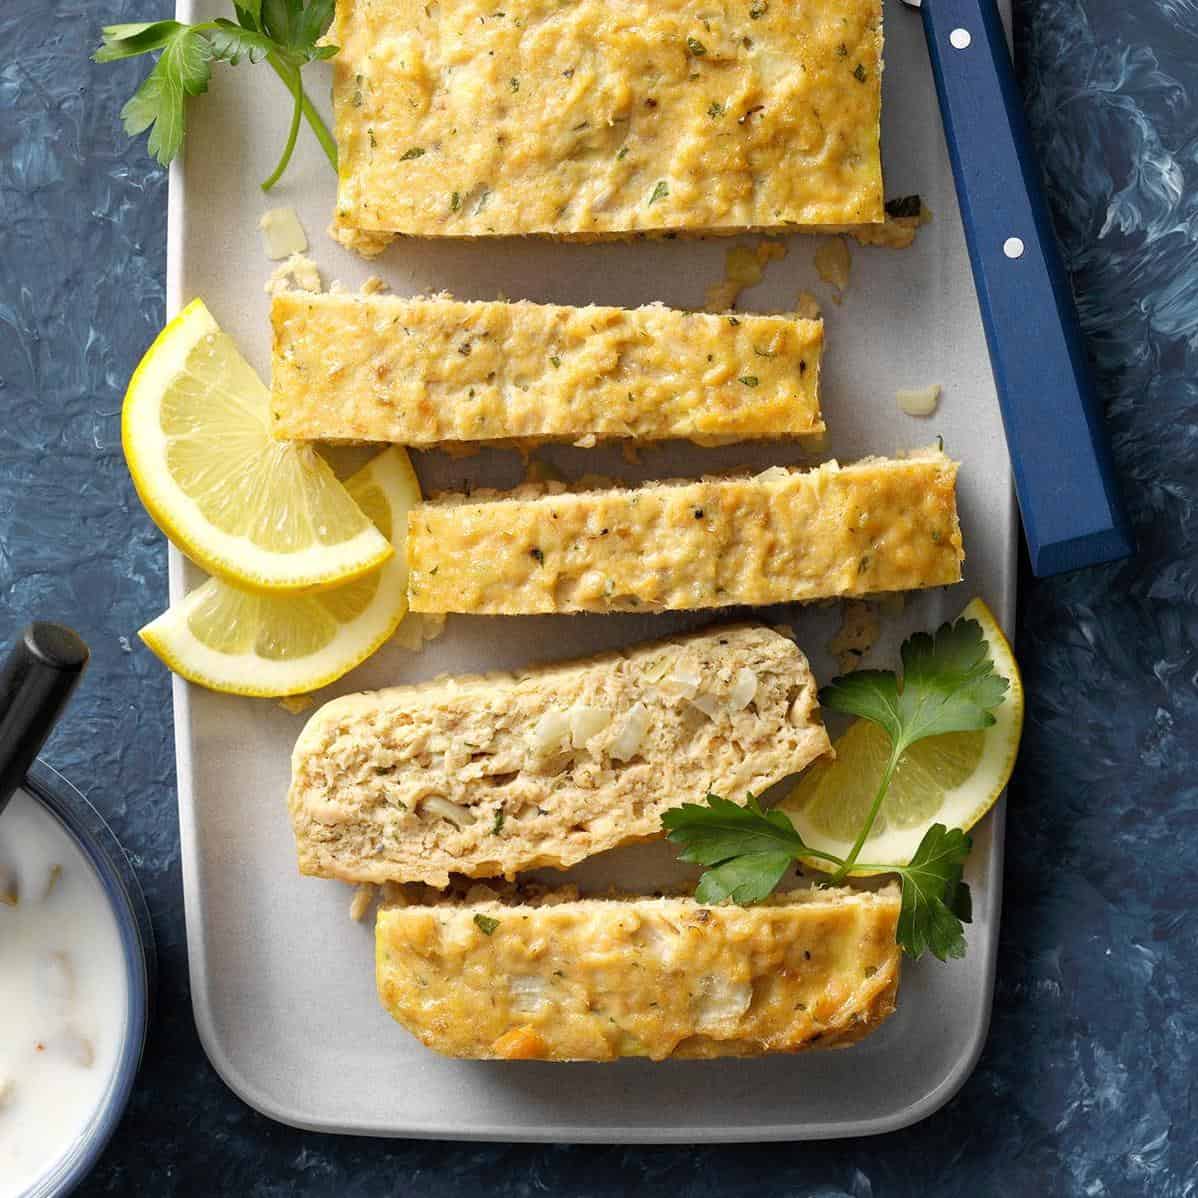  Introduce your taste buds to a delicious and nutritious salmon loaf, perfect for any occasion.